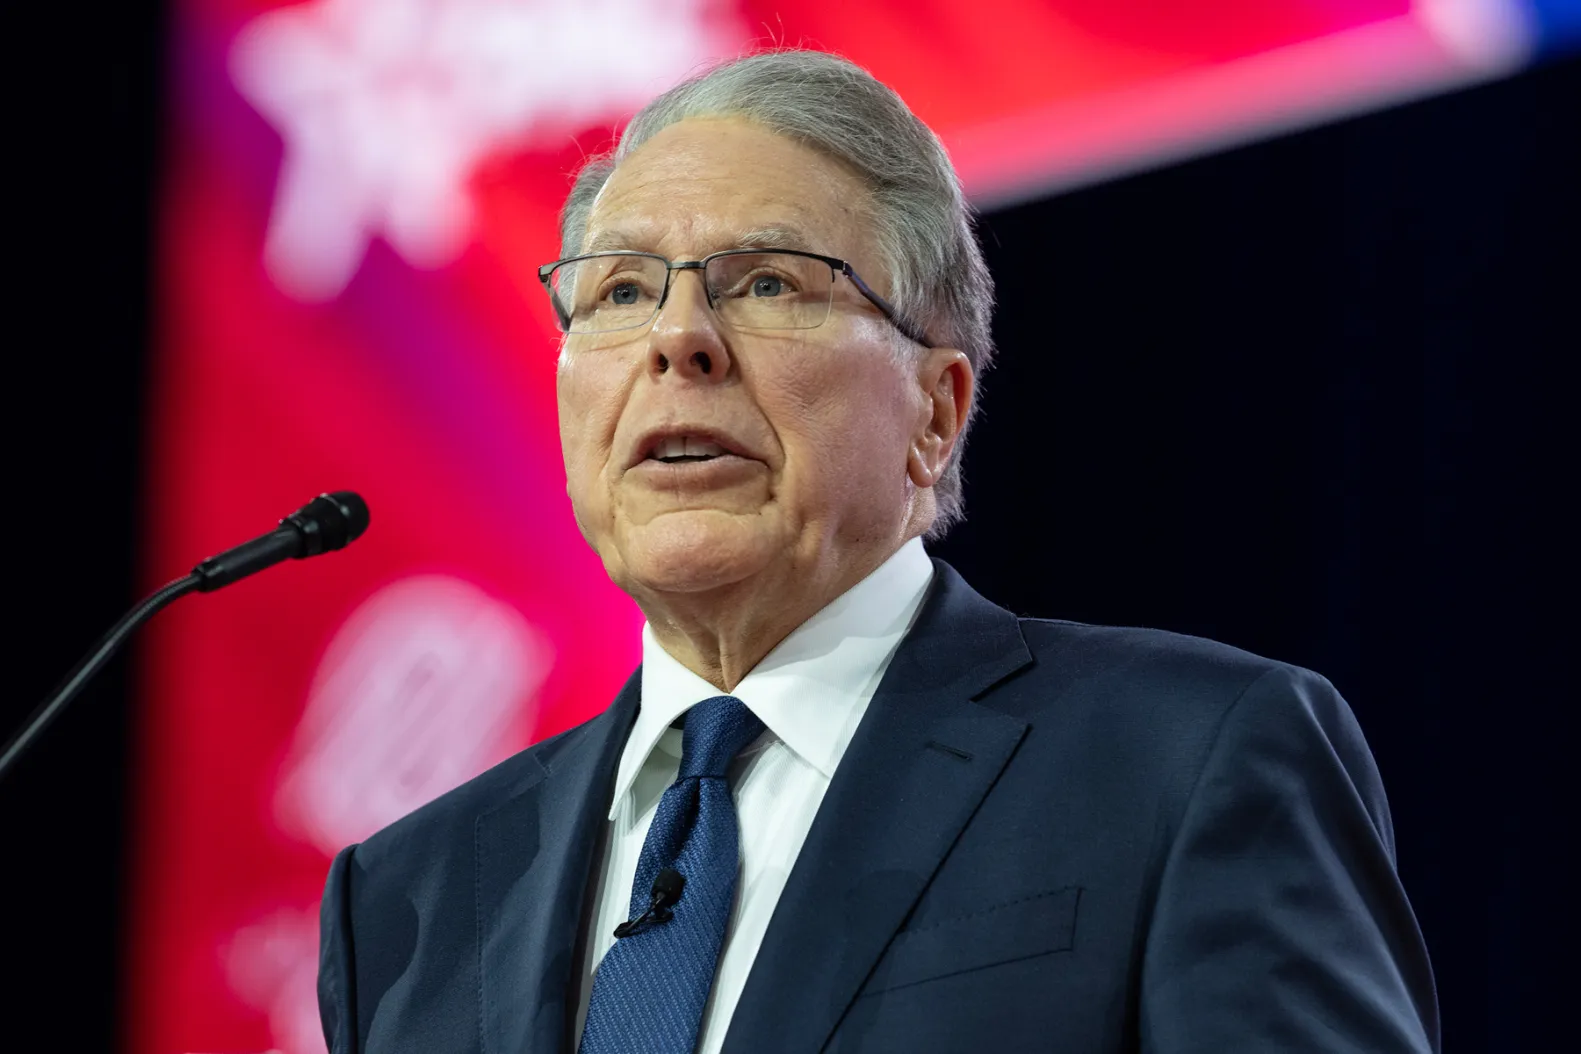 NRA Chief LaPierre Confesses to Misusing Funds for Personal Travel